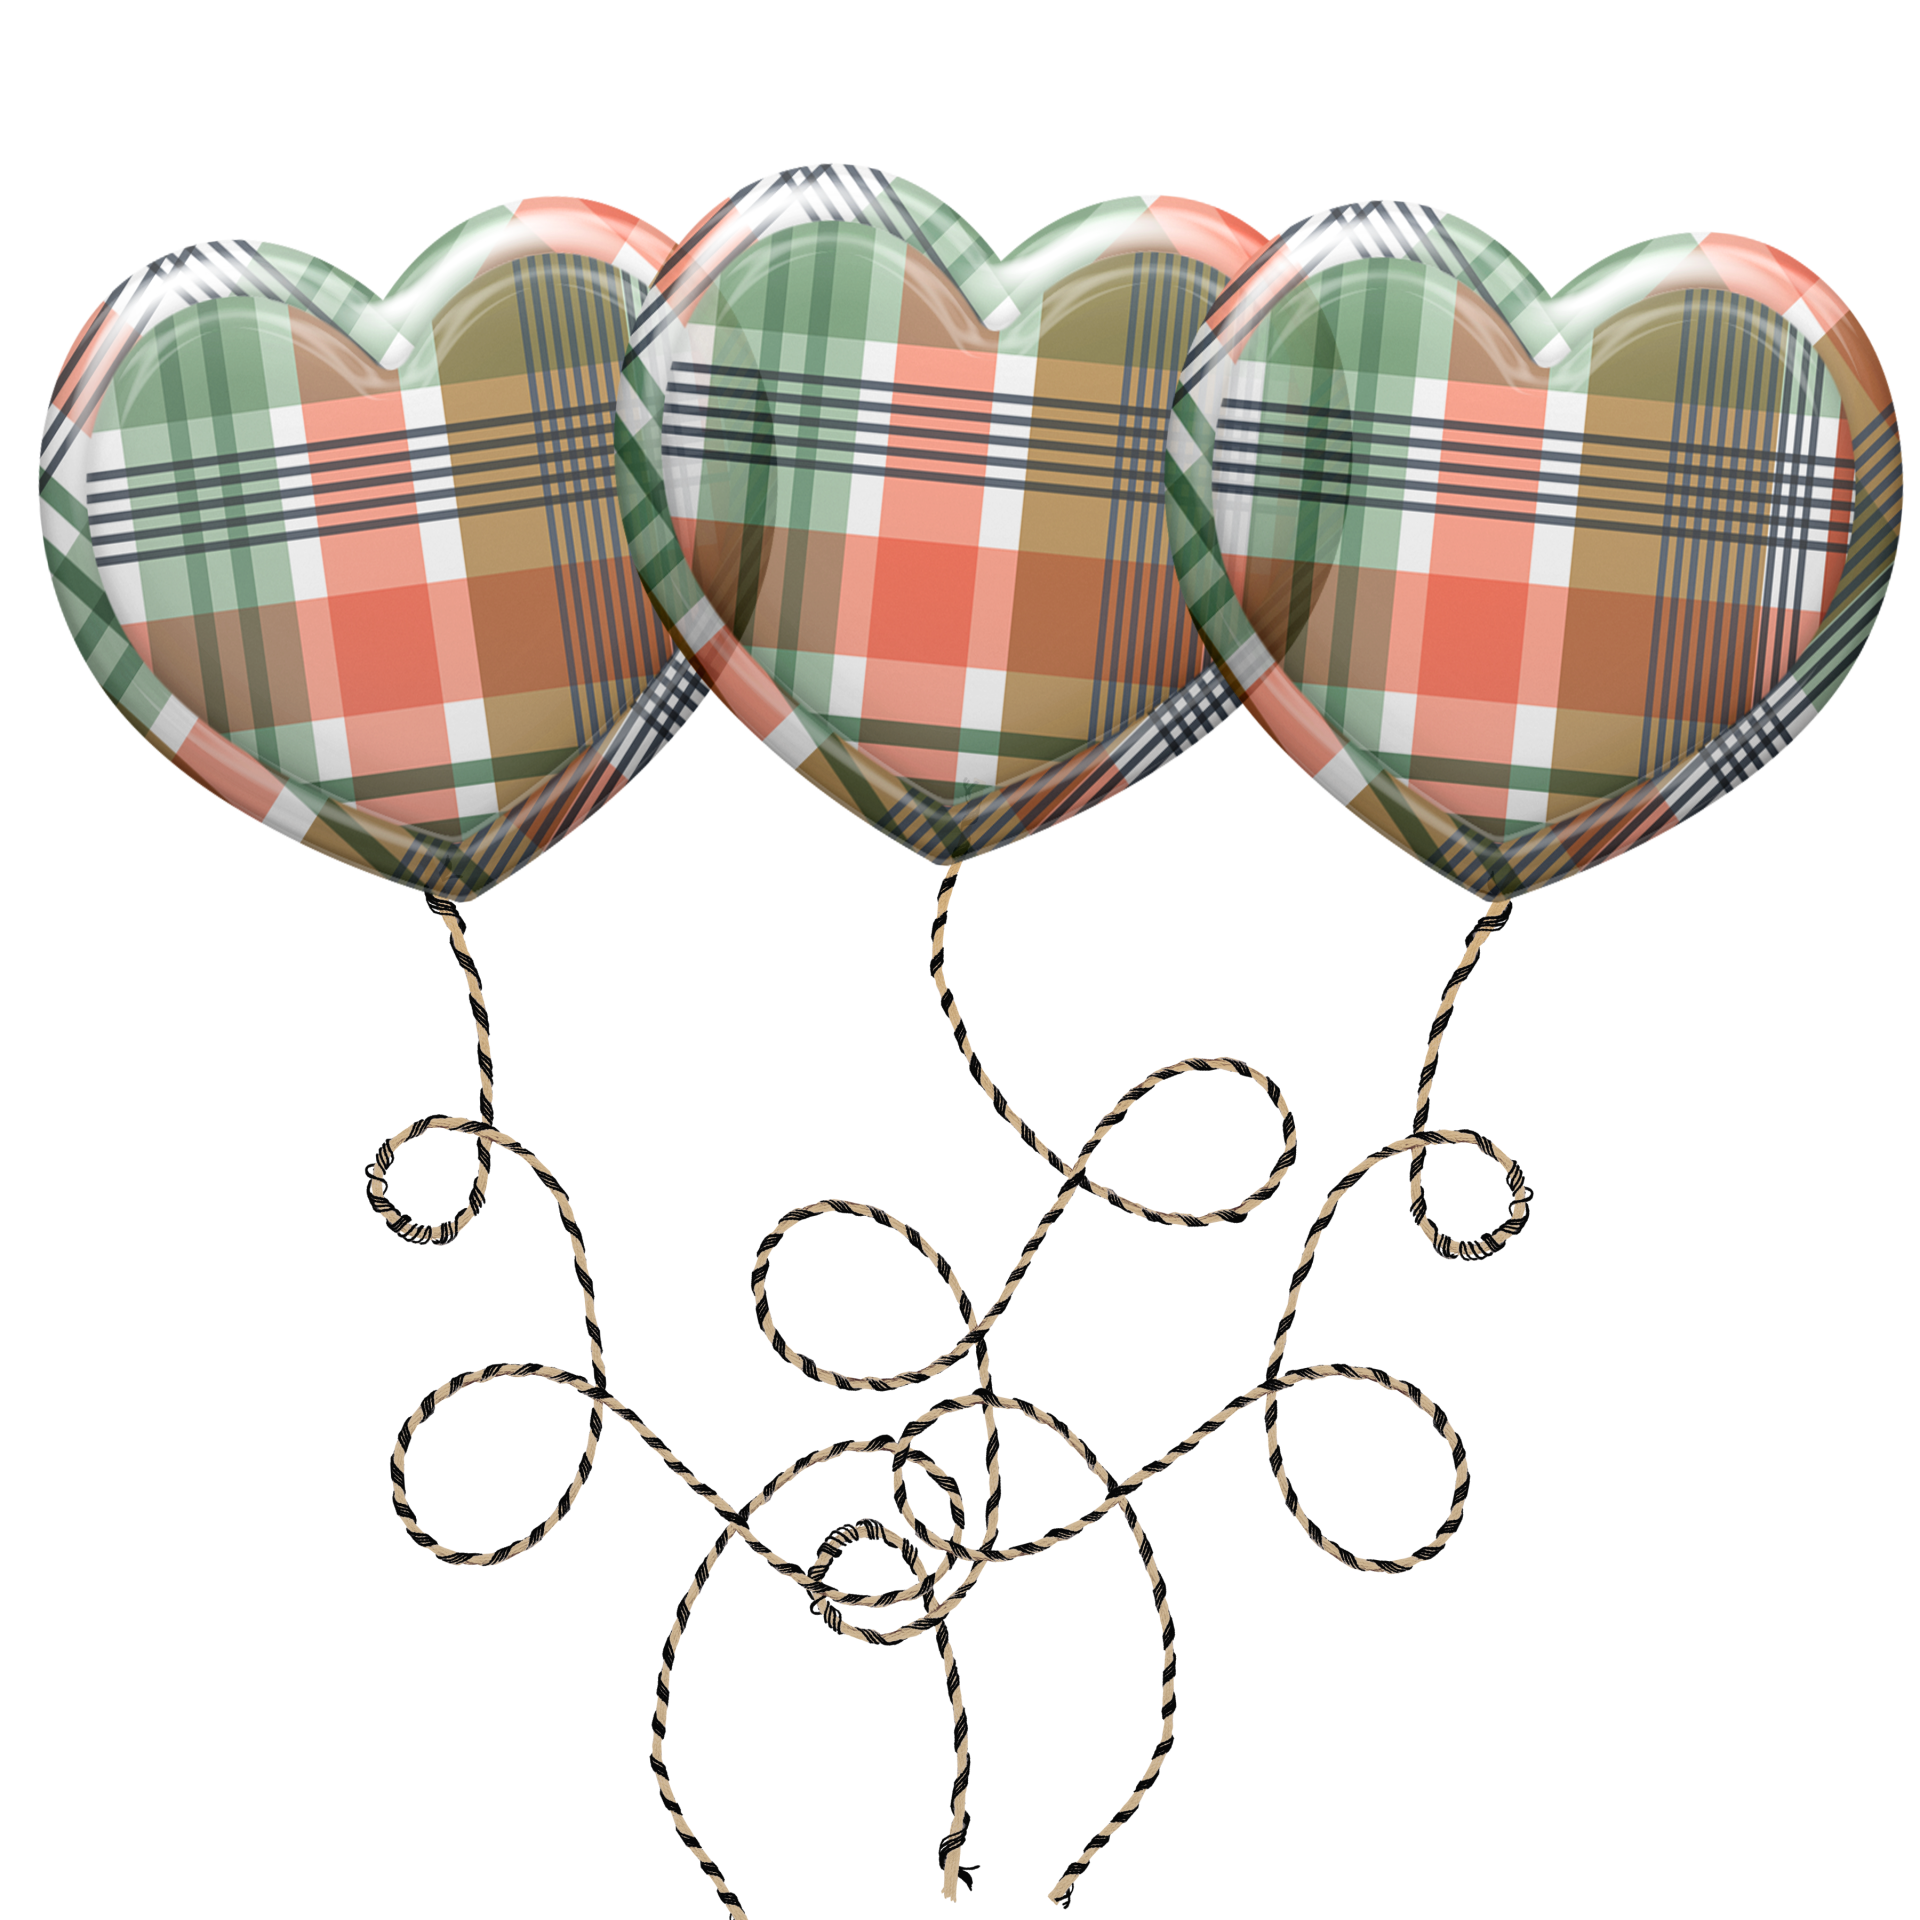 Heart Shaped Balloons, Patterned Plais